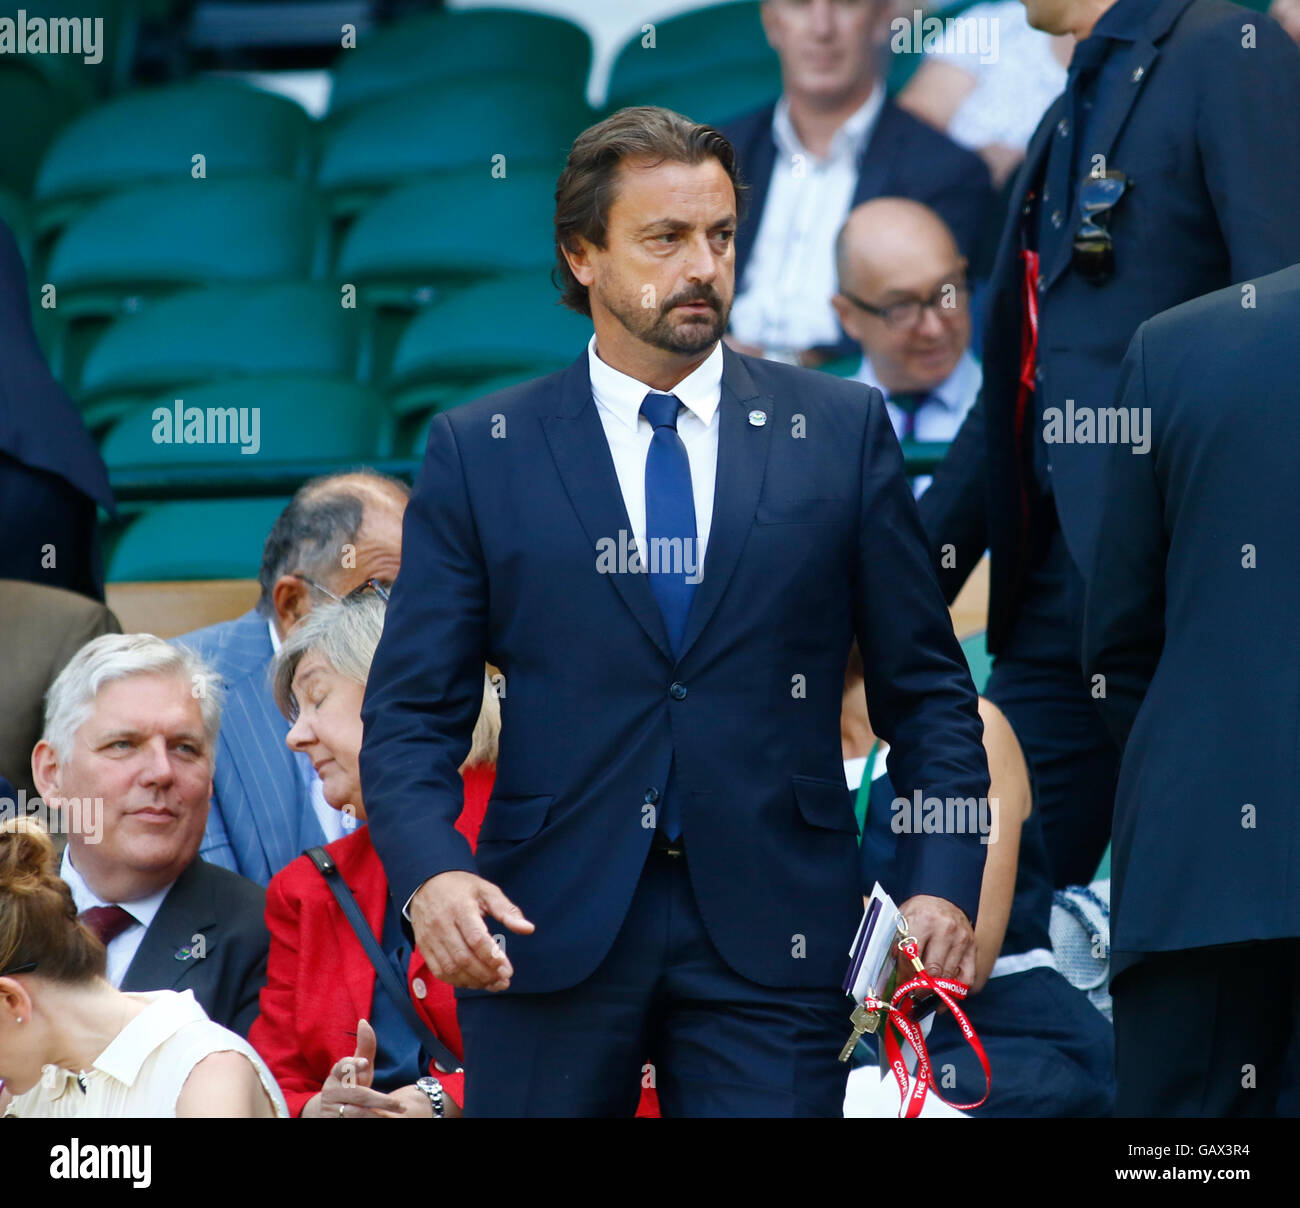 London, UK. 6th July, 2016. All England Lawn Tennis and Croquet Club, London, England. The Wimbledon Tennis Championships Day 10.  French tennis legend Henri Leconte in the Royal Box on Centre Court before today's quarter final between number 3 seed, Roger Federer (SUI) and number 9 seed, Marin Cilic (CRO). © Action Plus Sports Images/Alamy Live News Credit:  Action Plus Sports Images/Alamy Live News Stock Photo